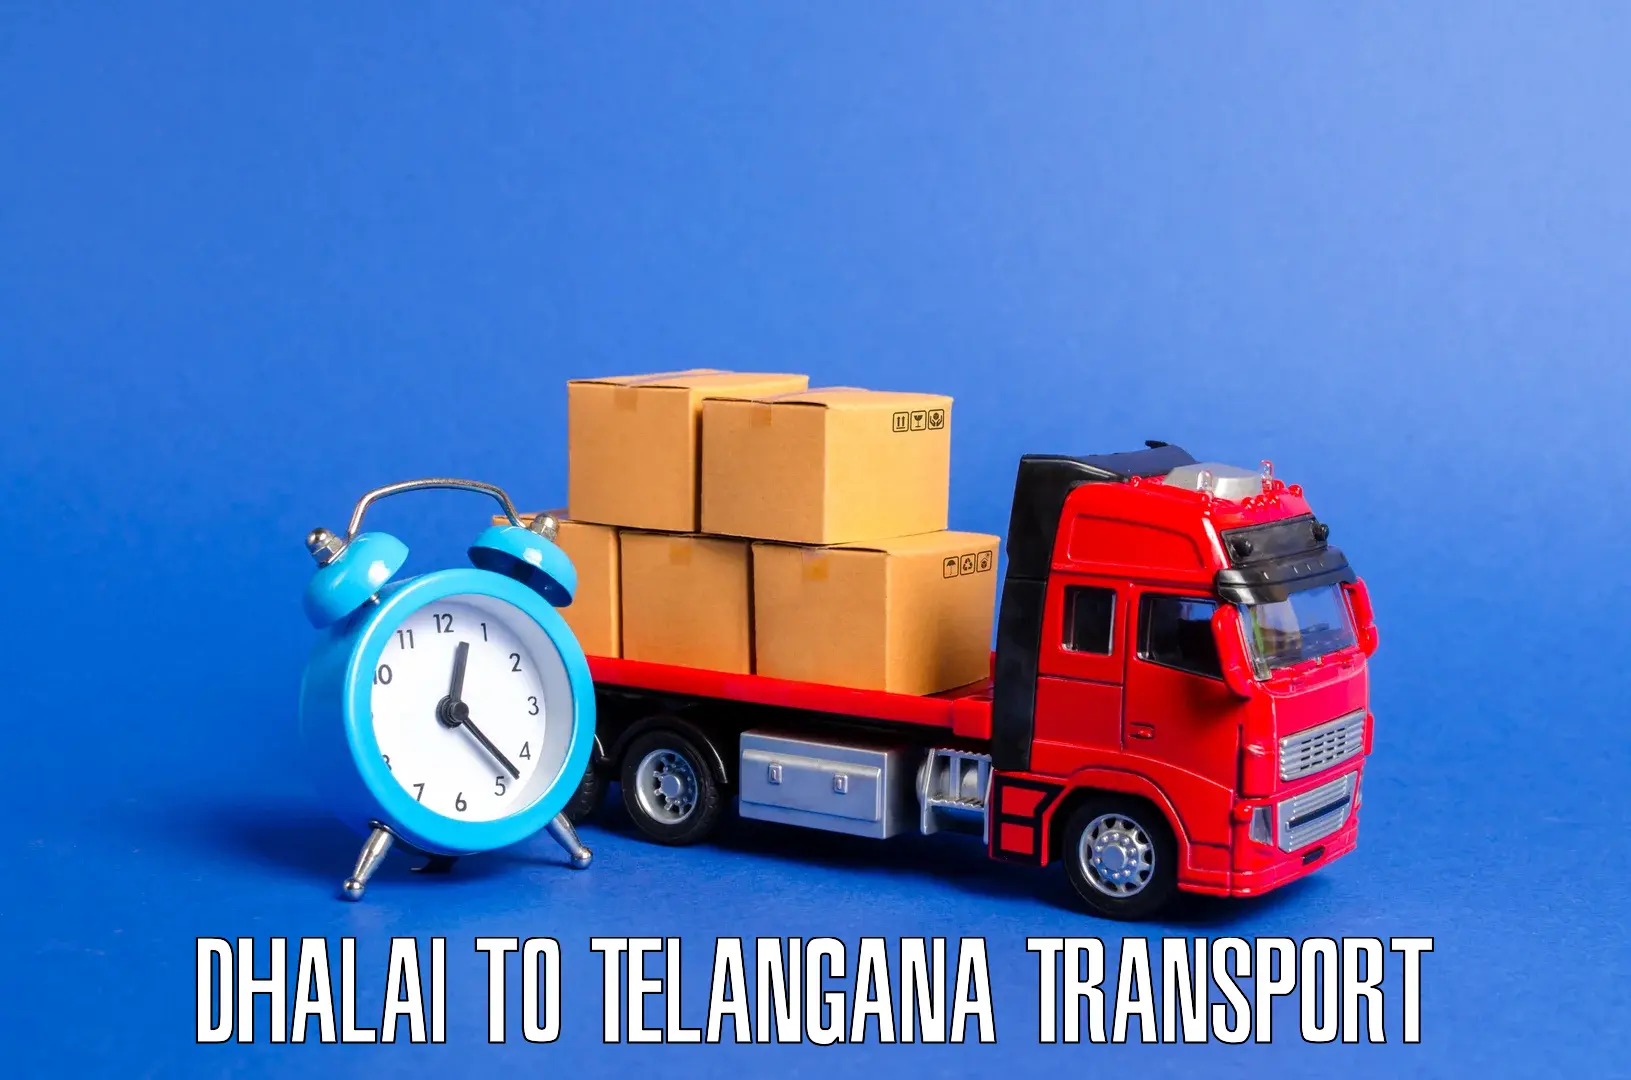 All India transport service Dhalai to Tadvai